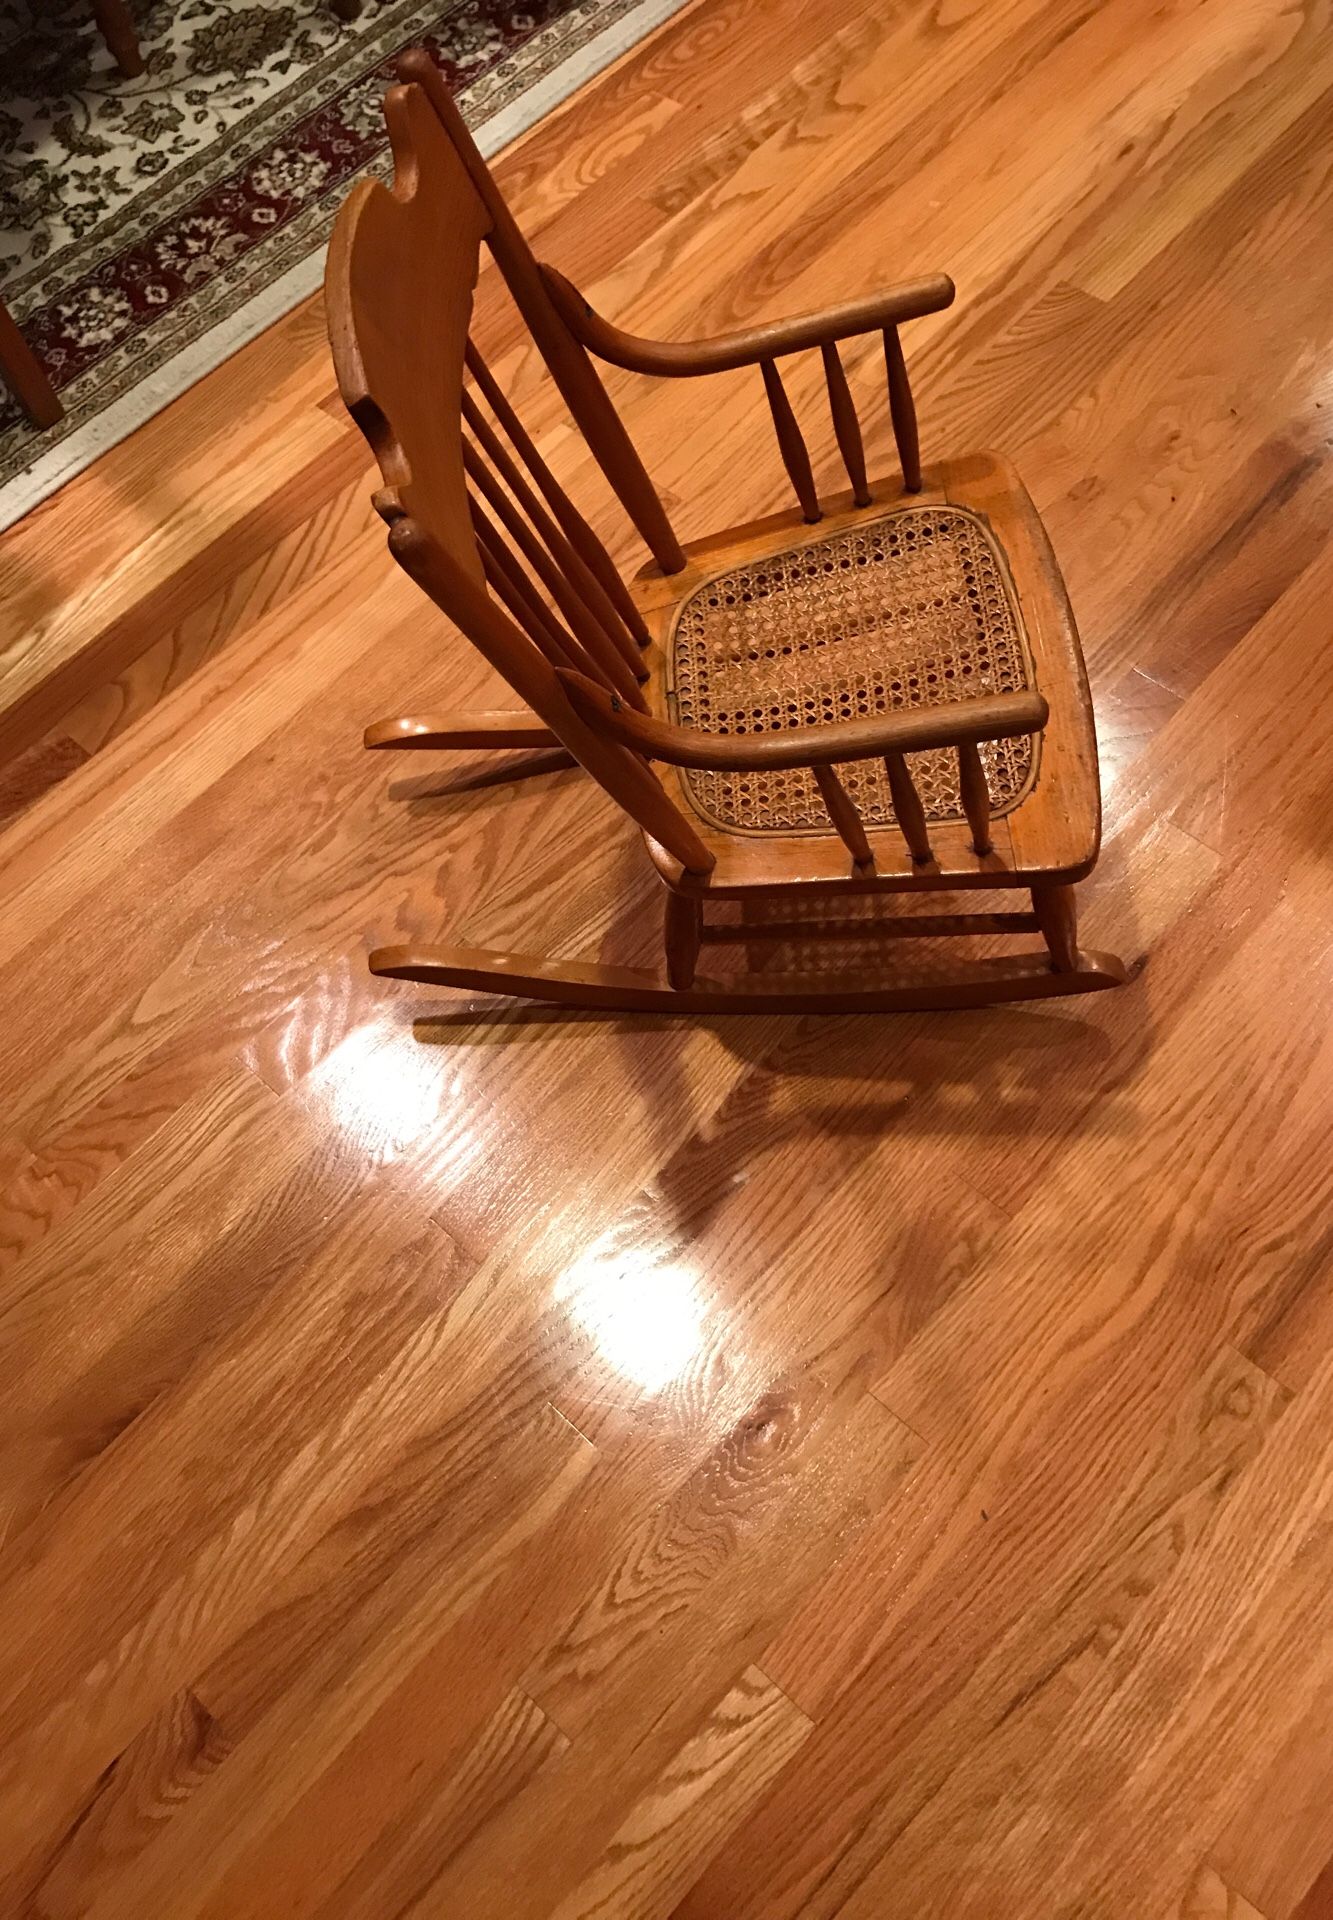 Antique child’s rocking chair. 60+ years old